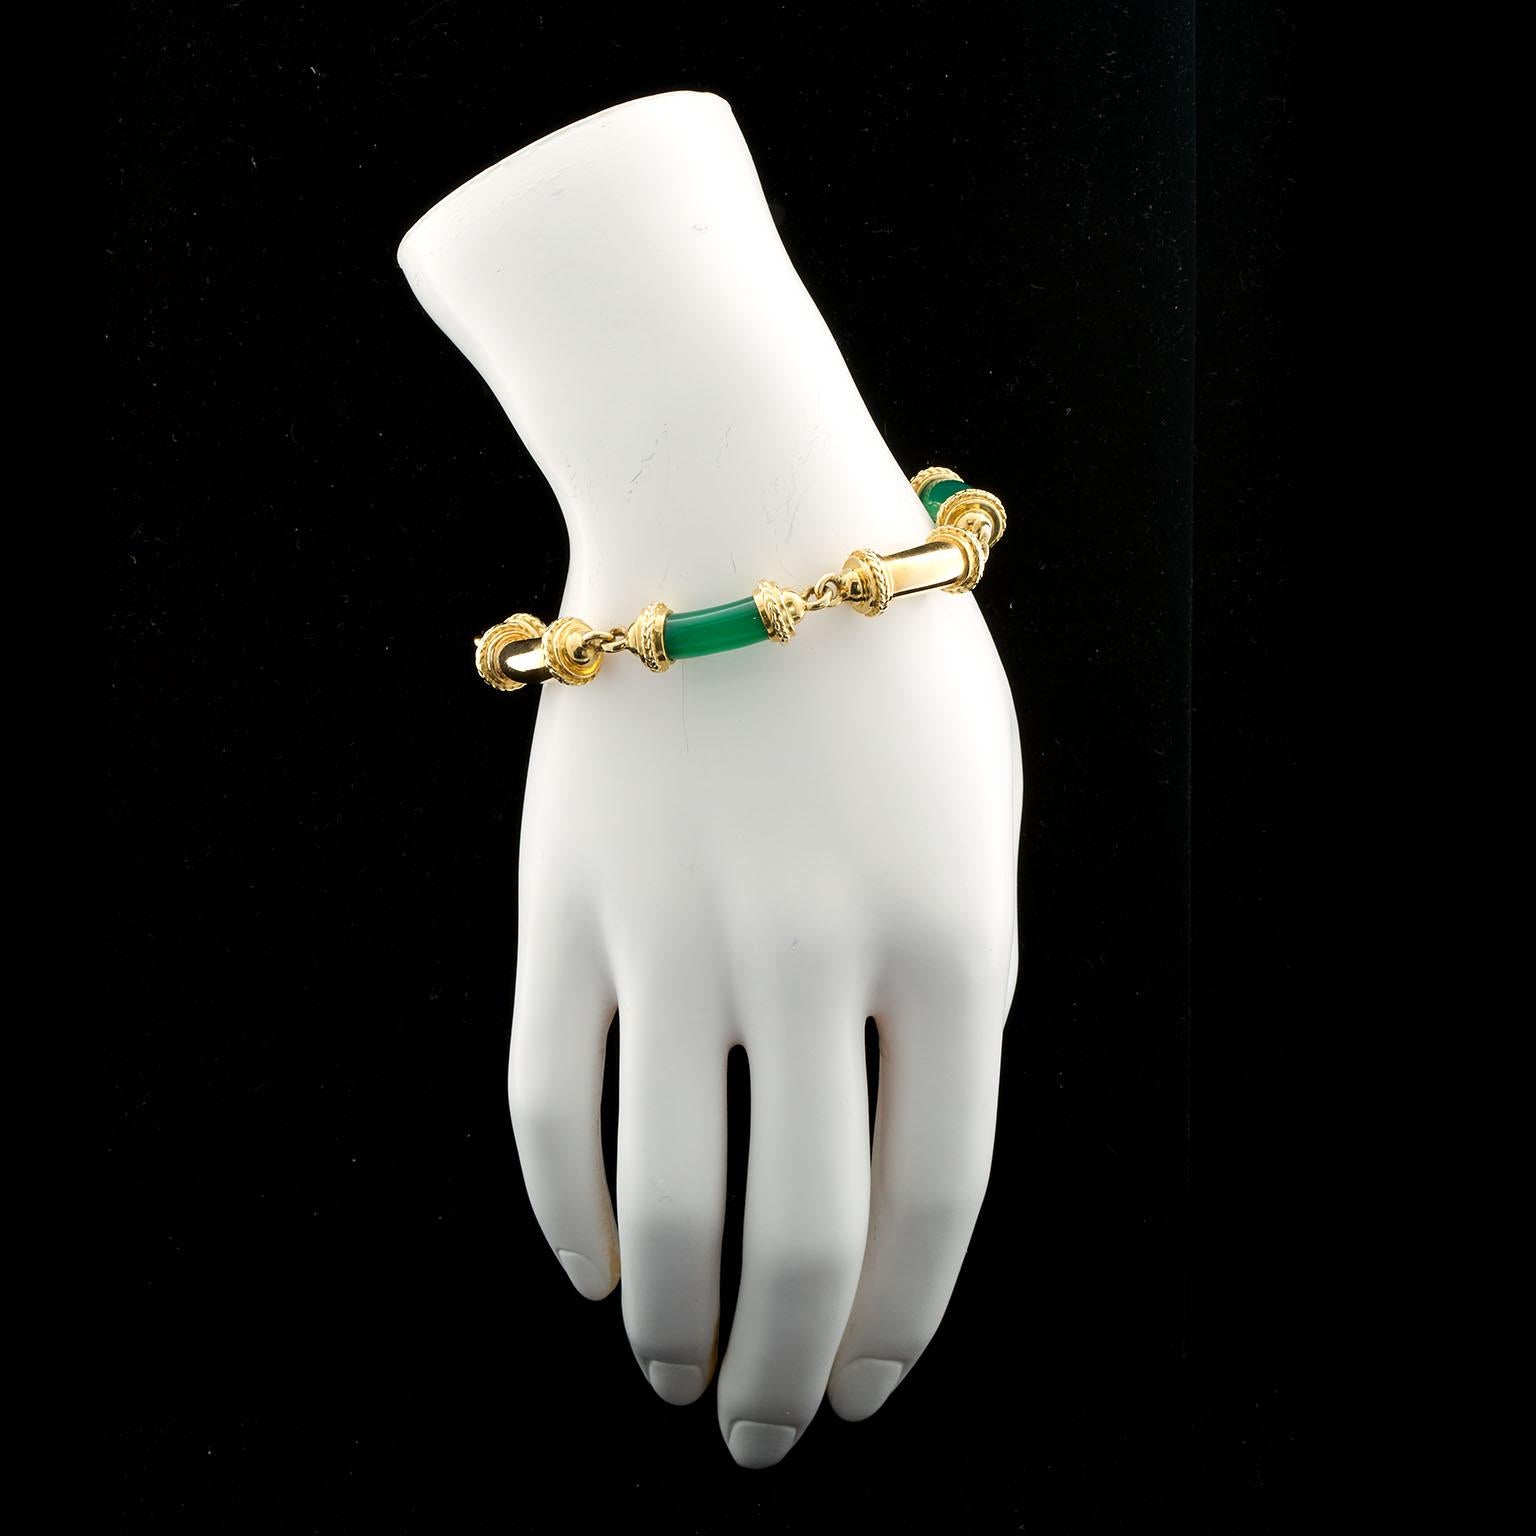 A vintage tubular sectional bracelet featuring three jade green Chalcedony tubes and three 18k gold tubes. Signed Tiffany & Co. Possibly 1940s.

Measures: 7-7/8 inches long.

No. TMWJ-5847